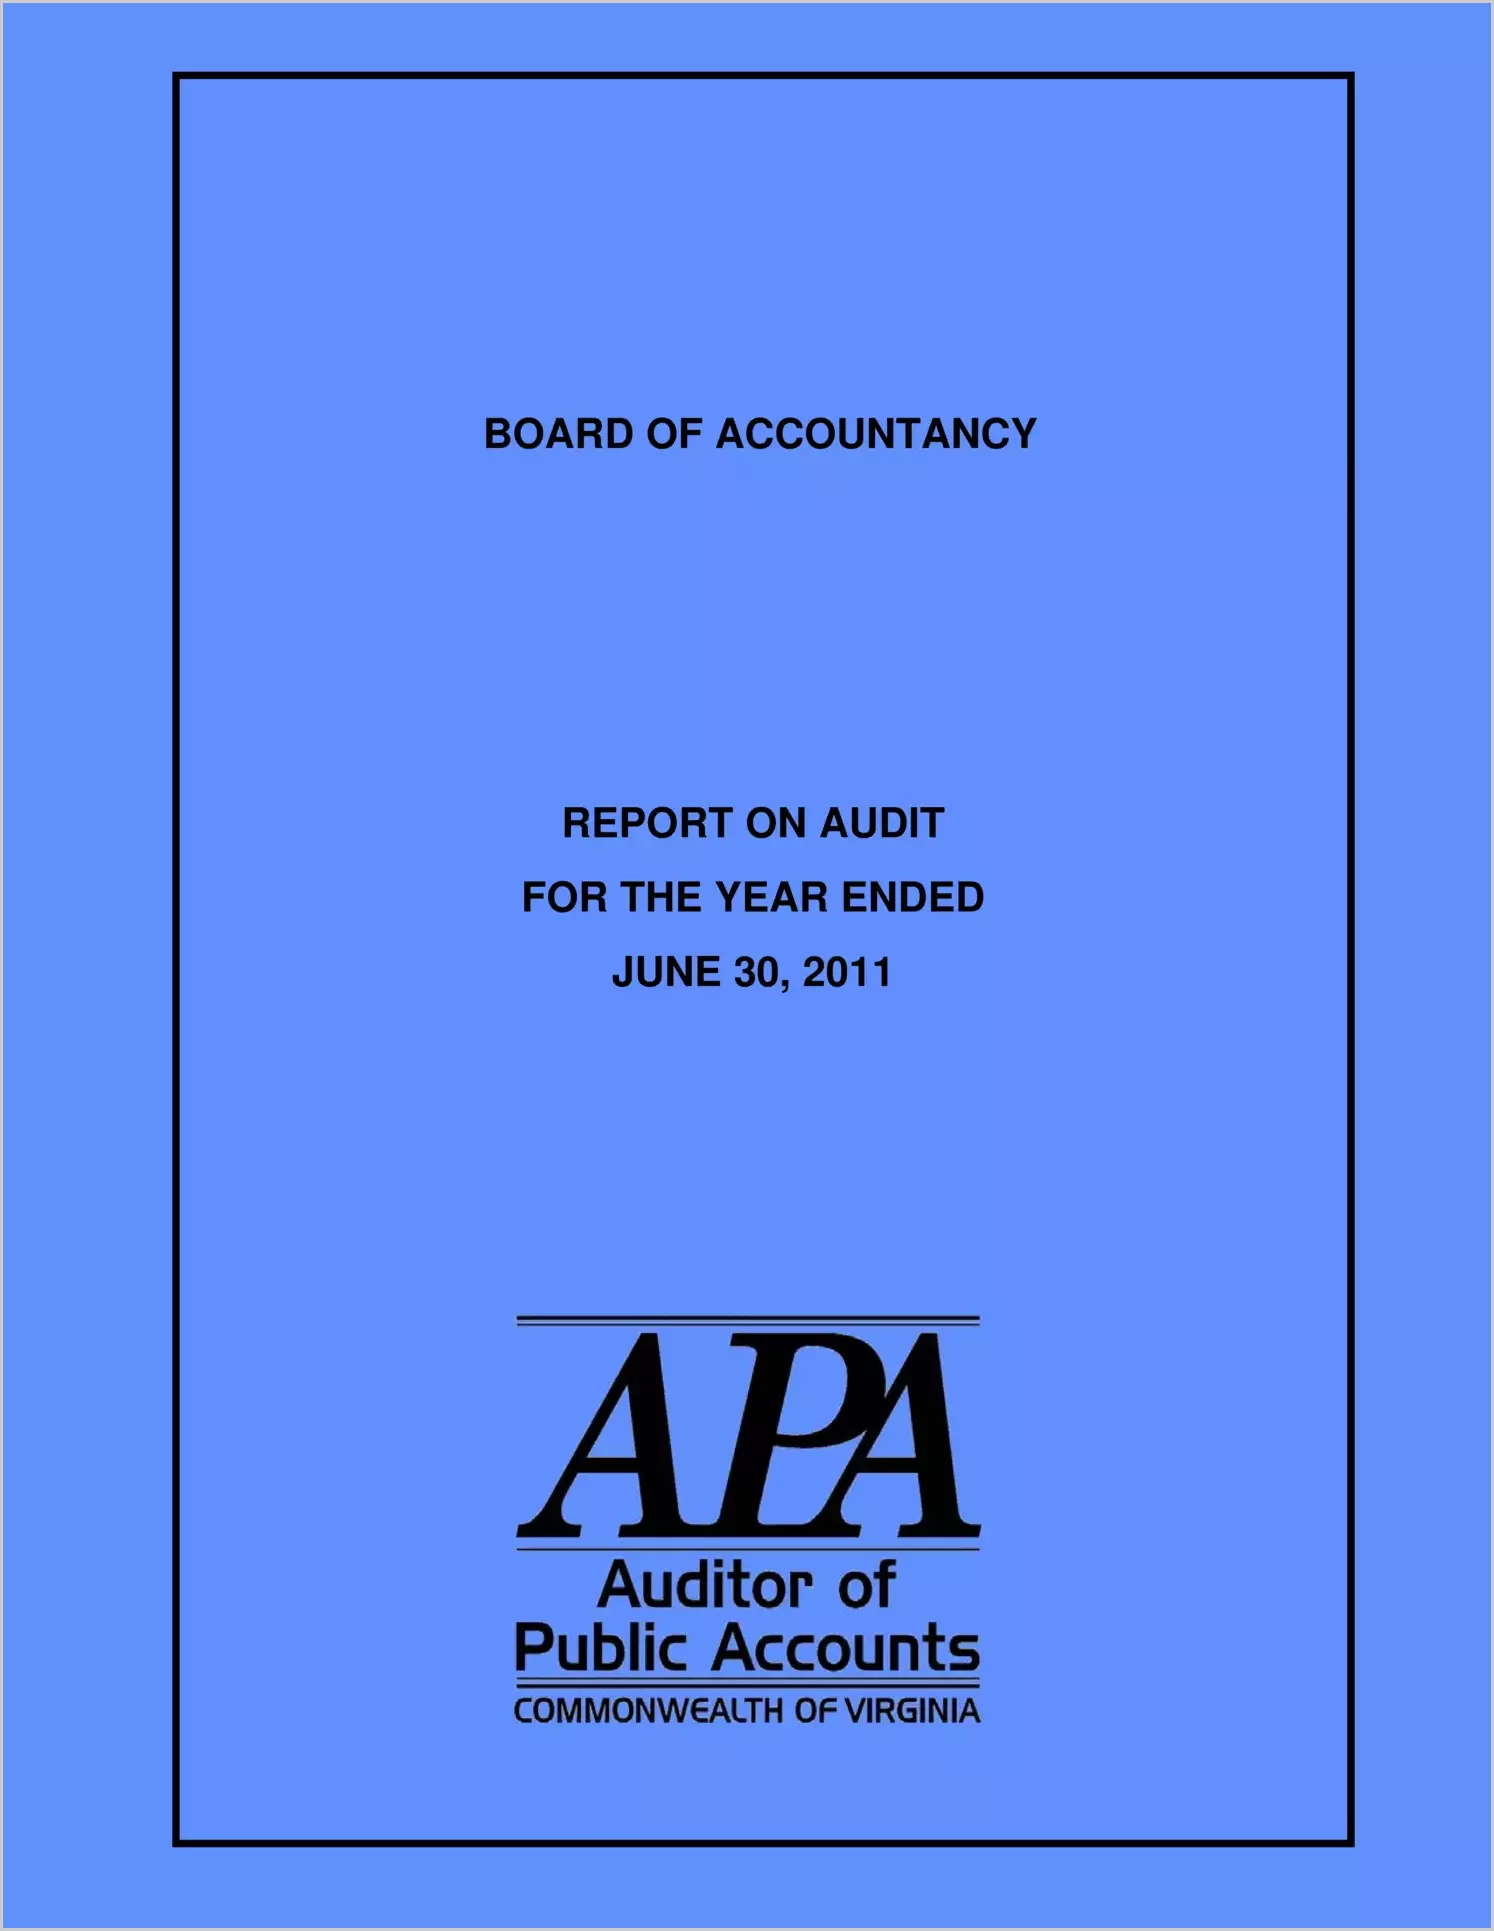 Virginia Board of Accountancy for the year ended June 30, 2011